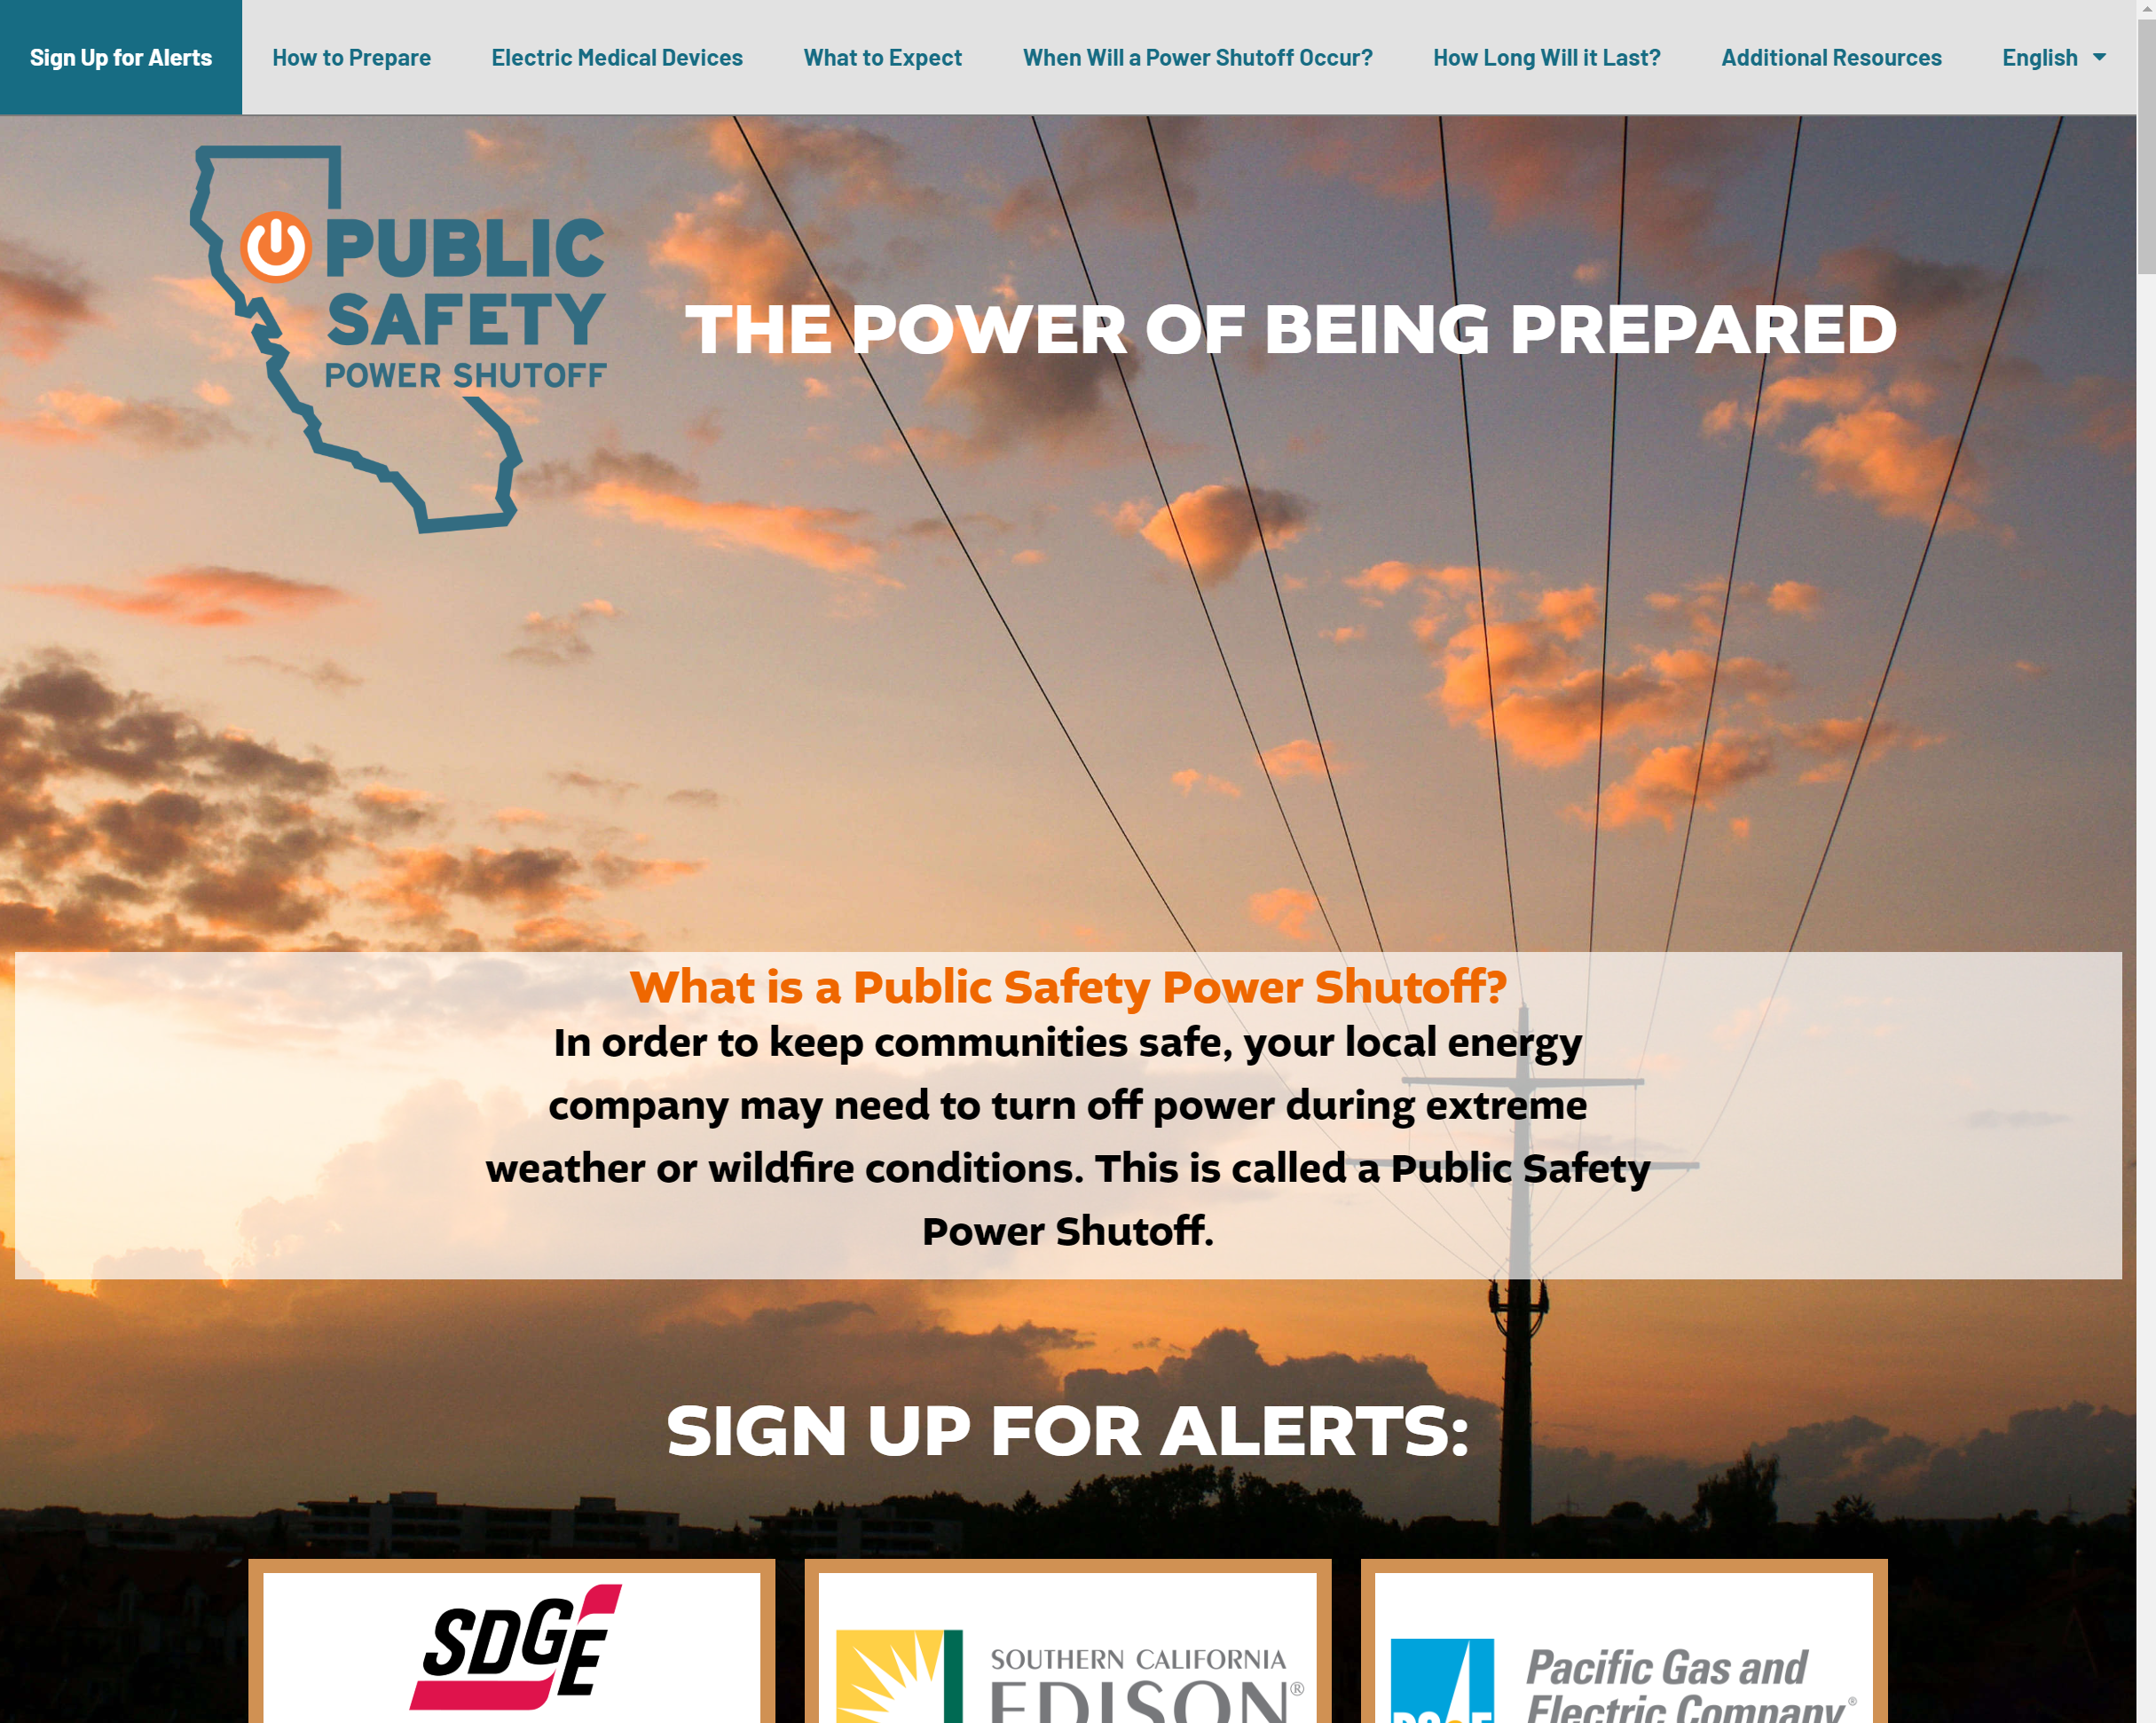 California utility companies created a stand-alone emergency site to inform the public about power shutoffs during the 2019 wildfire season.